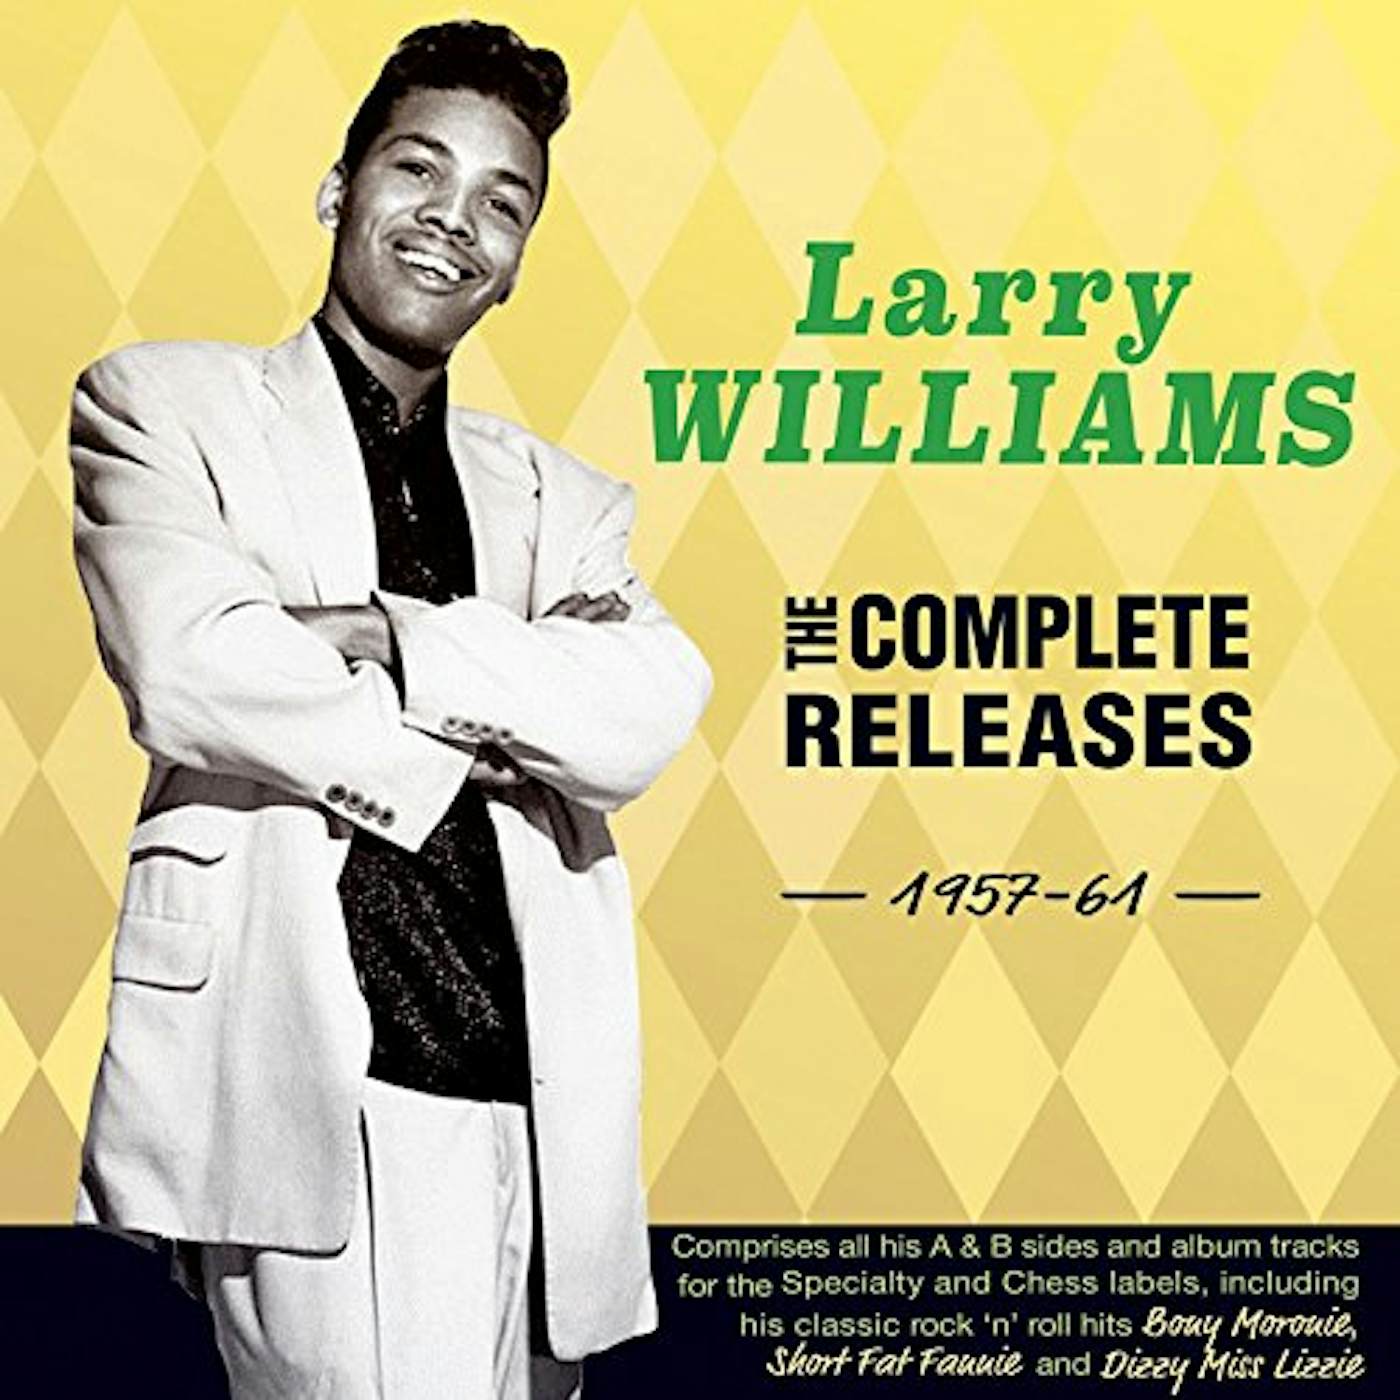 Larry Williams COMPLETE RELEASES 1957-61 CD